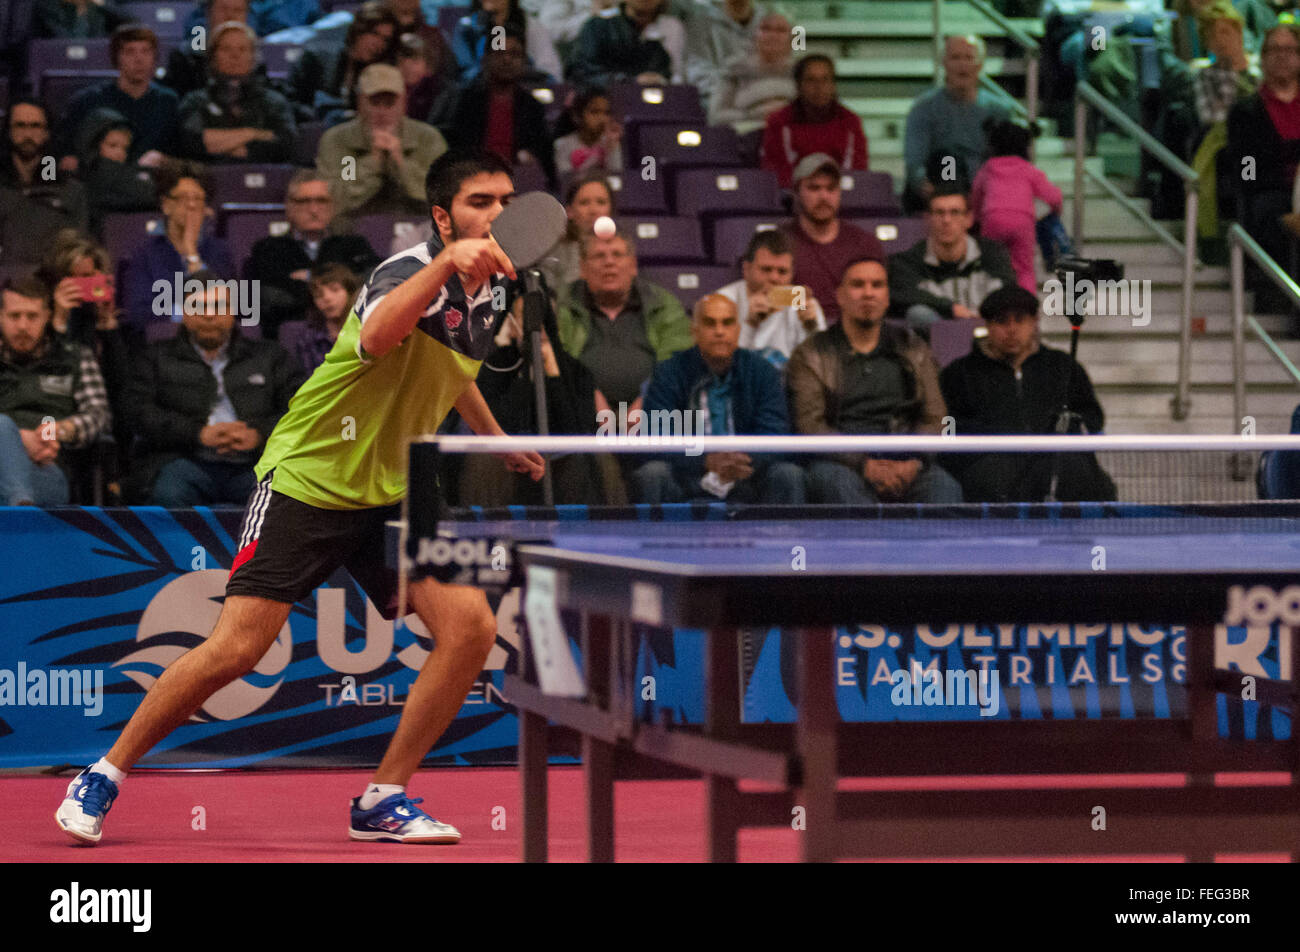 Greensboro, North Carolina, US. 6th Feb, 2016. Feb. 6, 2016 - Greensboro, N.C., USA - KUNAL CHODRI returns a volley from Kanak Jha during the men's semi-finals on day three of the 2016 U.S. Olympic Table Tennis Trials. Jha defeated Chodri to advance to the men's final. The top three men and women from the trials move on to compete in April at the 2016 North America Olympic Qualification tournament in Ontario, Canada. The 2016 Summer Olympics will be held in Rio De Janeiro, Brazil, Aug. 5-21. © Timothy L. Hale/ZUMA Wire/Alamy Live News Stock Photo